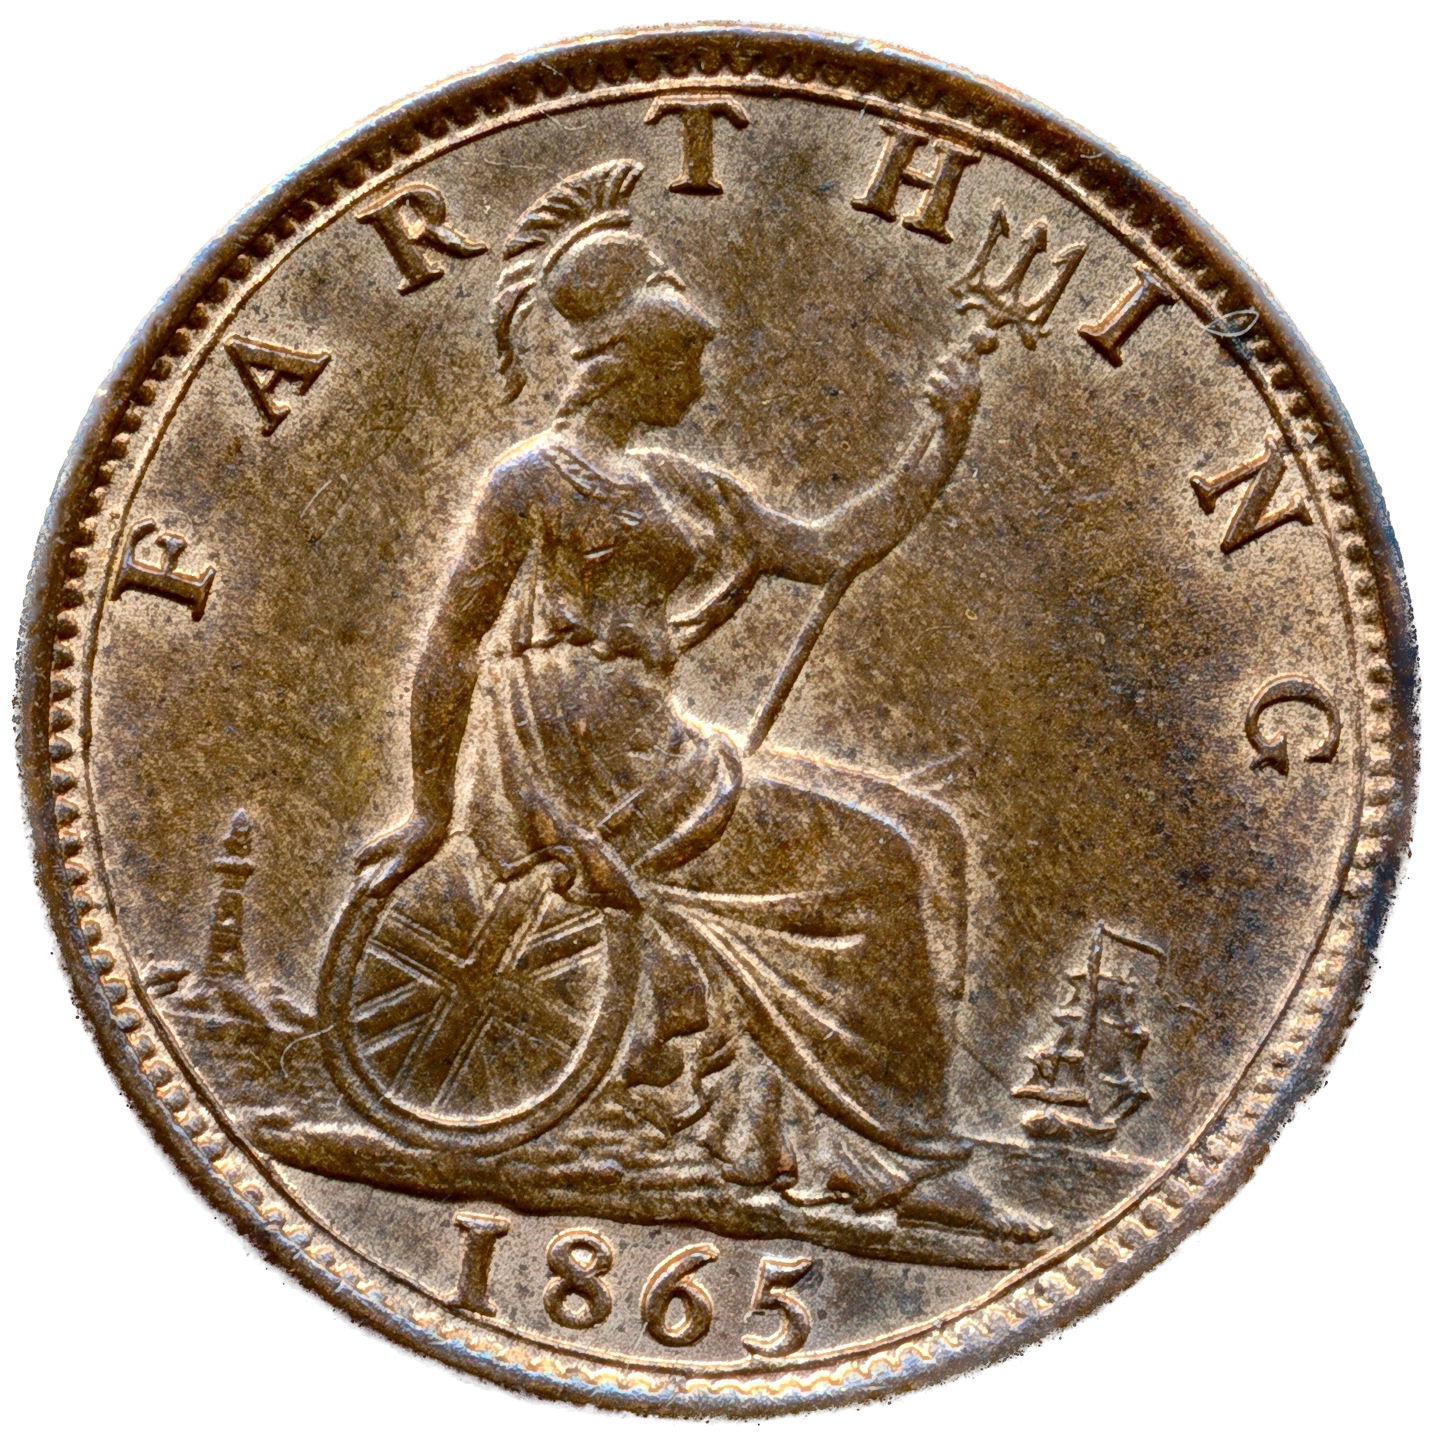 1865 Farthing S3958 F 512 Small 8 UNC